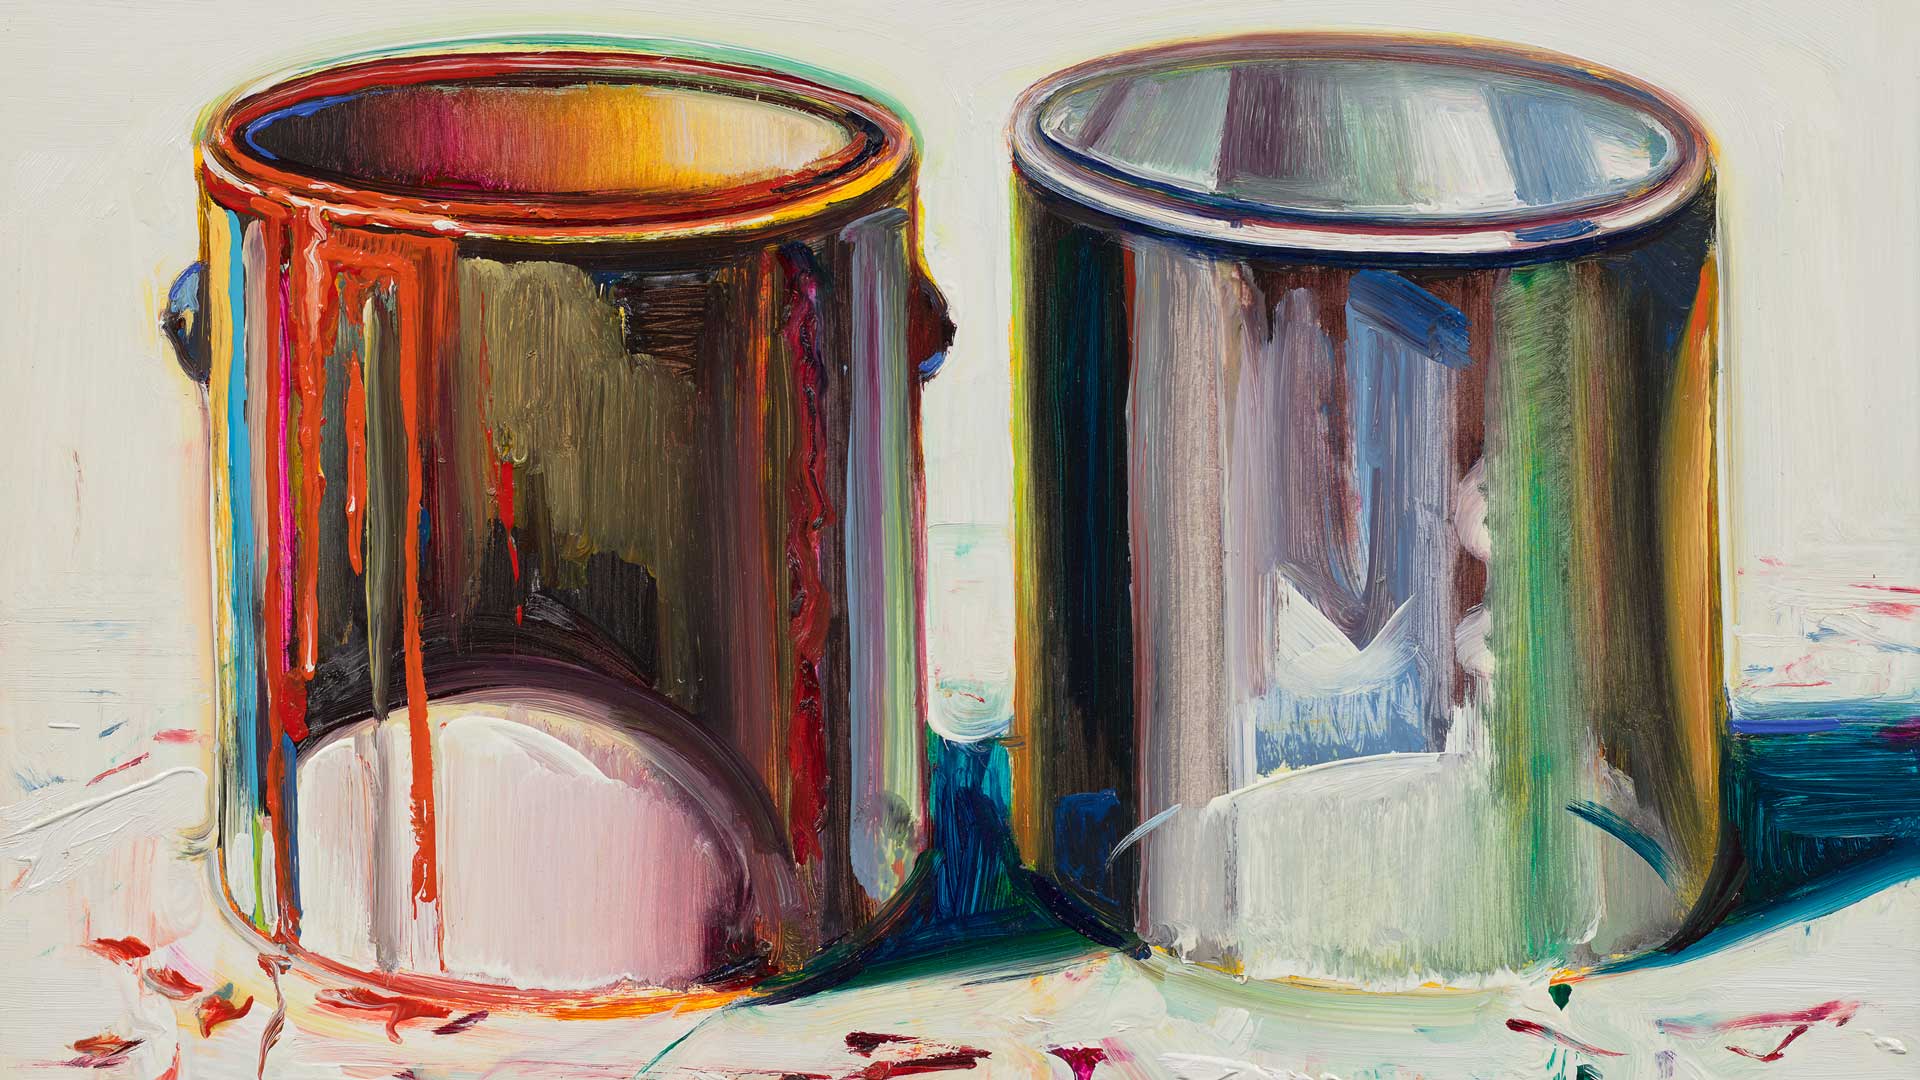 Wayne-Thiebaud-two-paint-cans-robb-report-italia